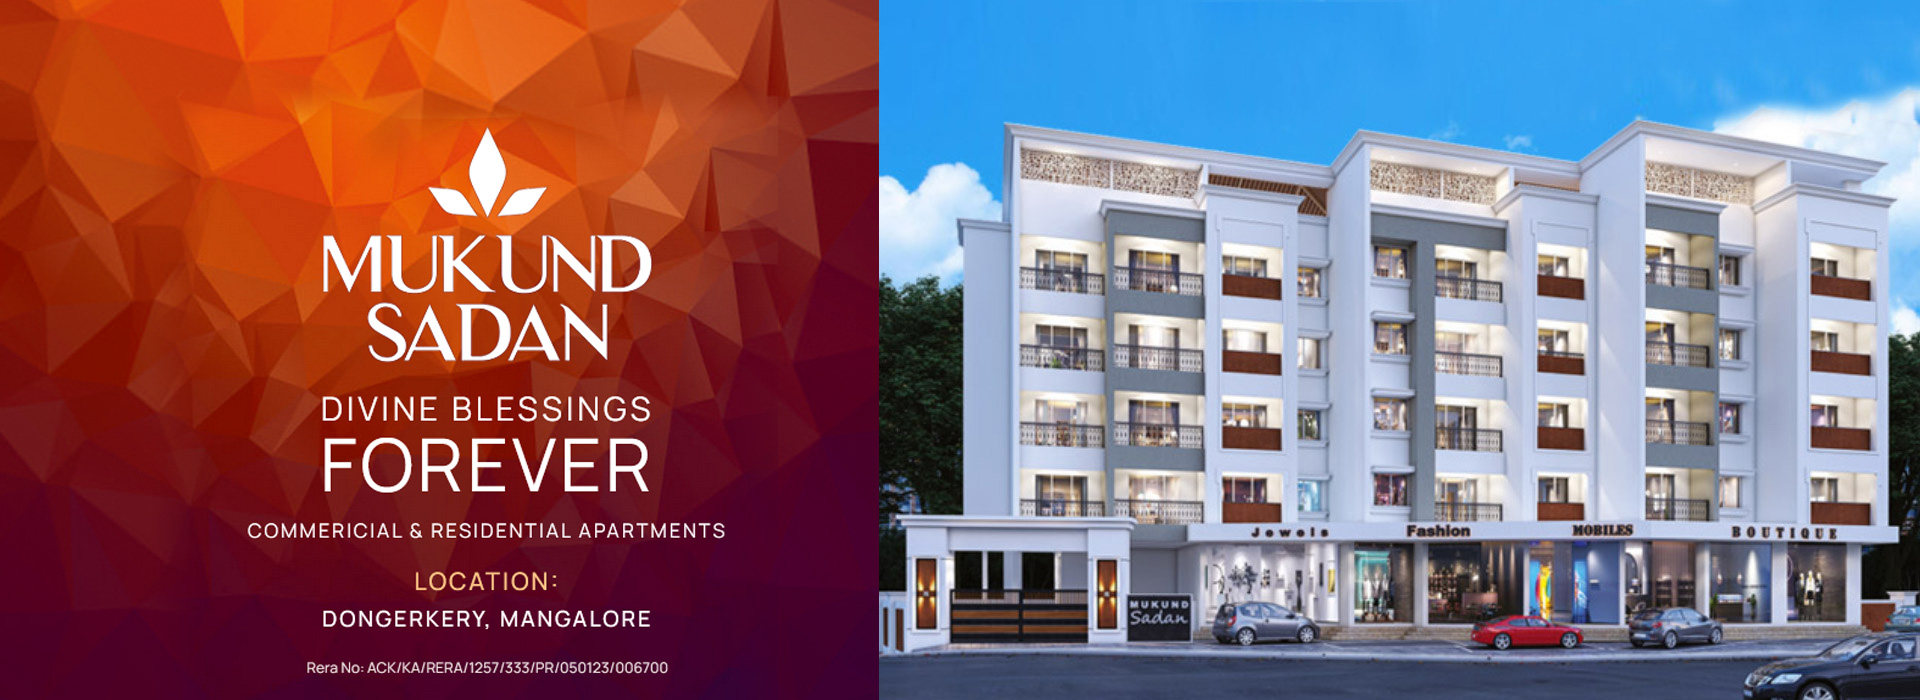 Mukund Sadan Commercial and Residential Apartments, Mukund Sadan Commercial and Residential Apartments Mangalore, Mukund Sadan Commercial and Residential Apartments by Mukund MGM Realty Mangalore, Mukund Sadan Commercial and Residential Apartments Mangalore by Mukund MGM Realty Mangalore